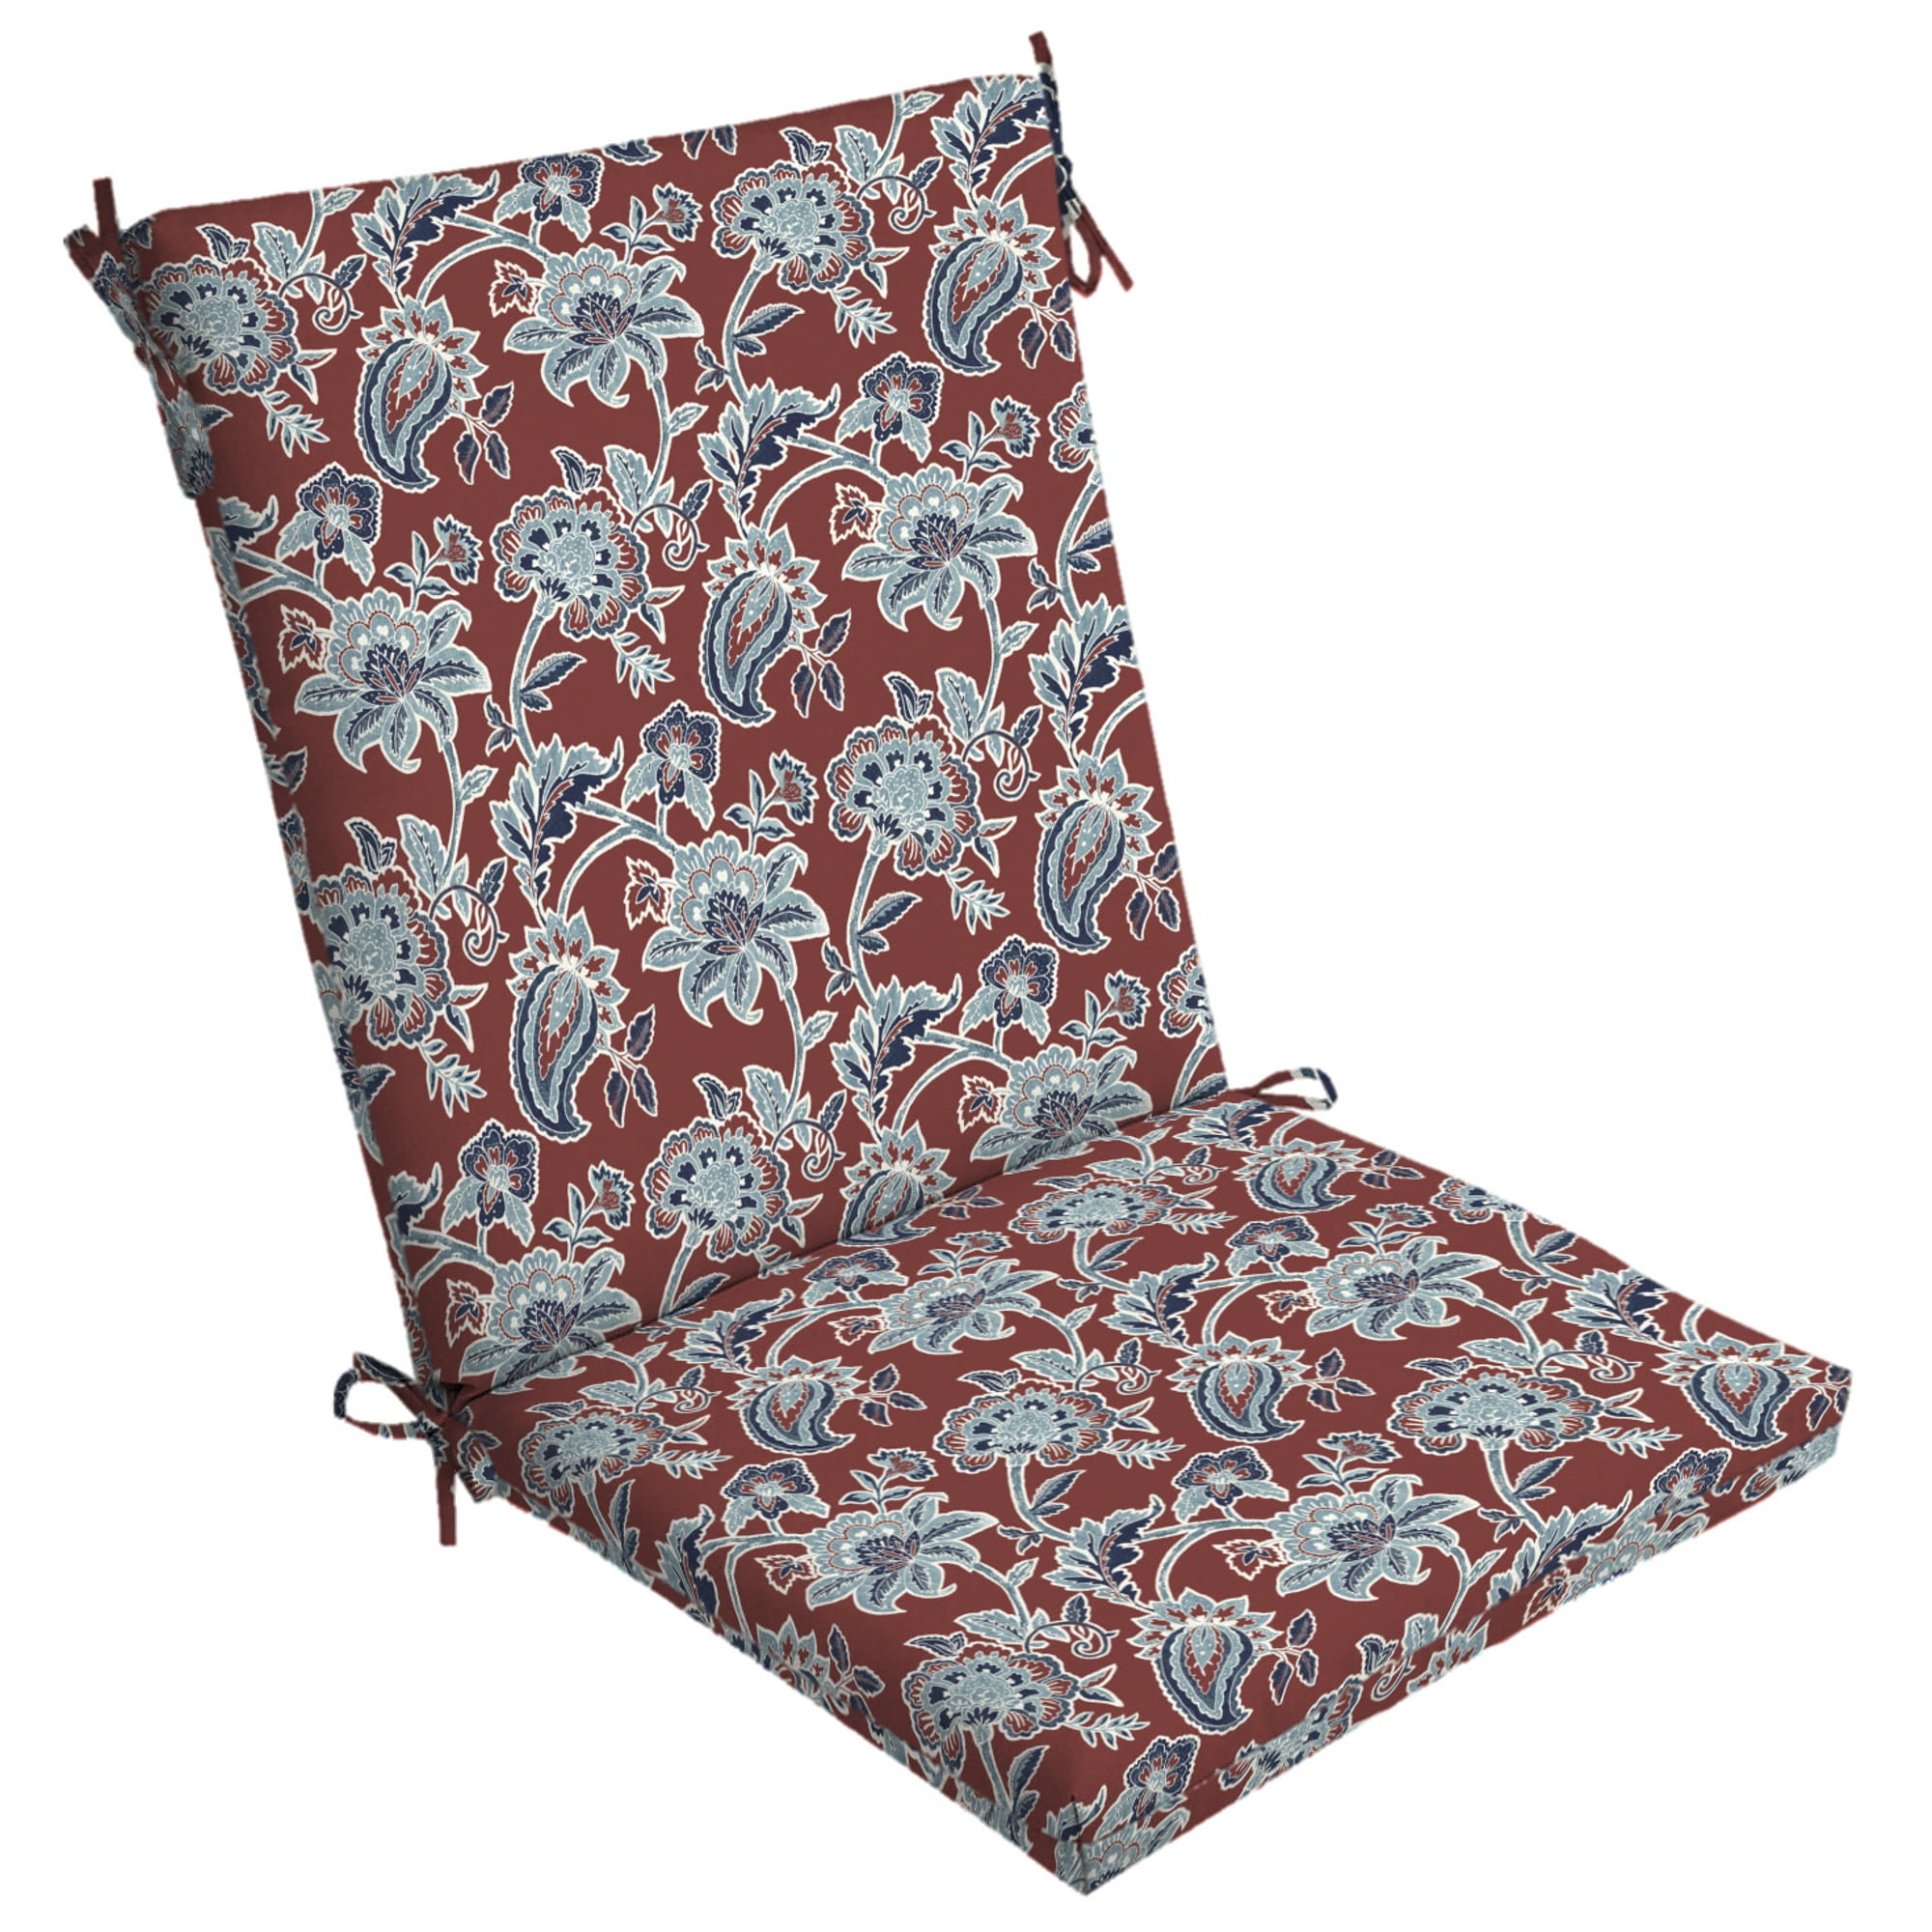 Arden Selections Caspian 44 x 20 in. Outdoor Chair Cushion